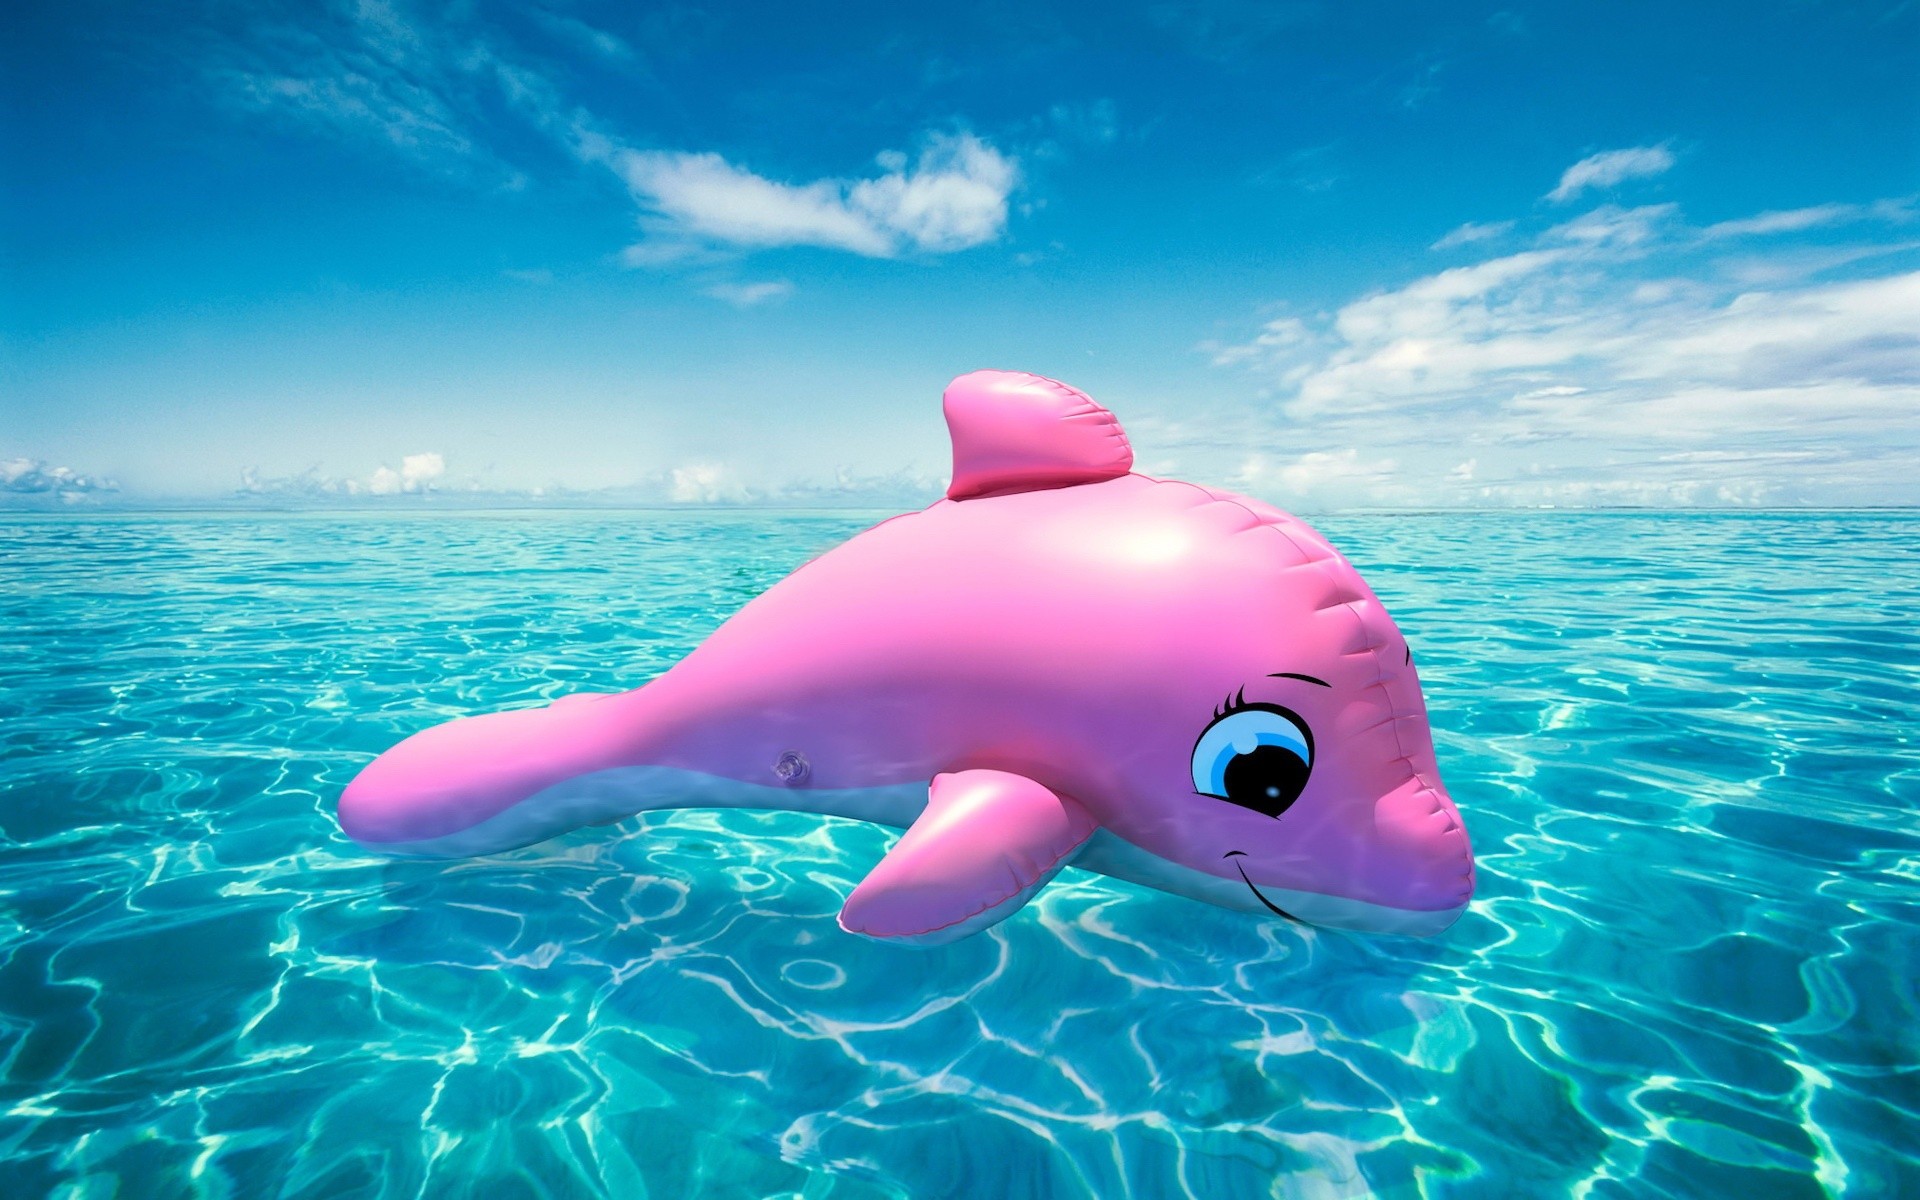 Coral Dolphin Toy Pink Inflatable Reef Beach Wallpaper - Cute Pink Dolphin , HD Wallpaper & Backgrounds